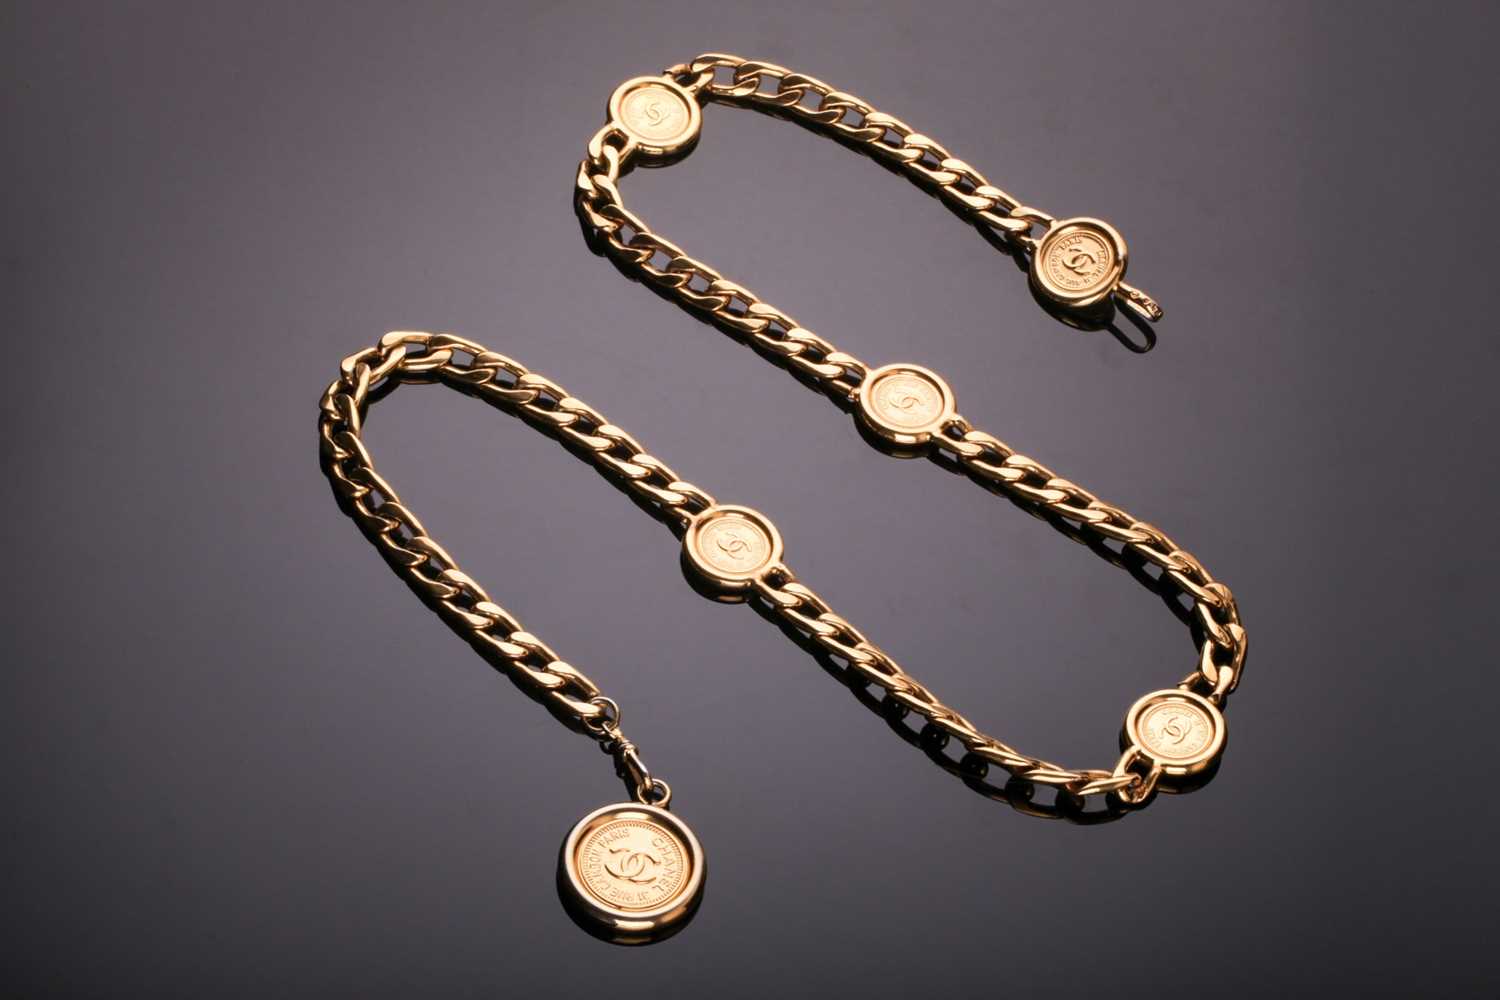 A Chanel "31 Rue Cambon Paris" belt, the gold plated curb link and "CC" medallion chain with